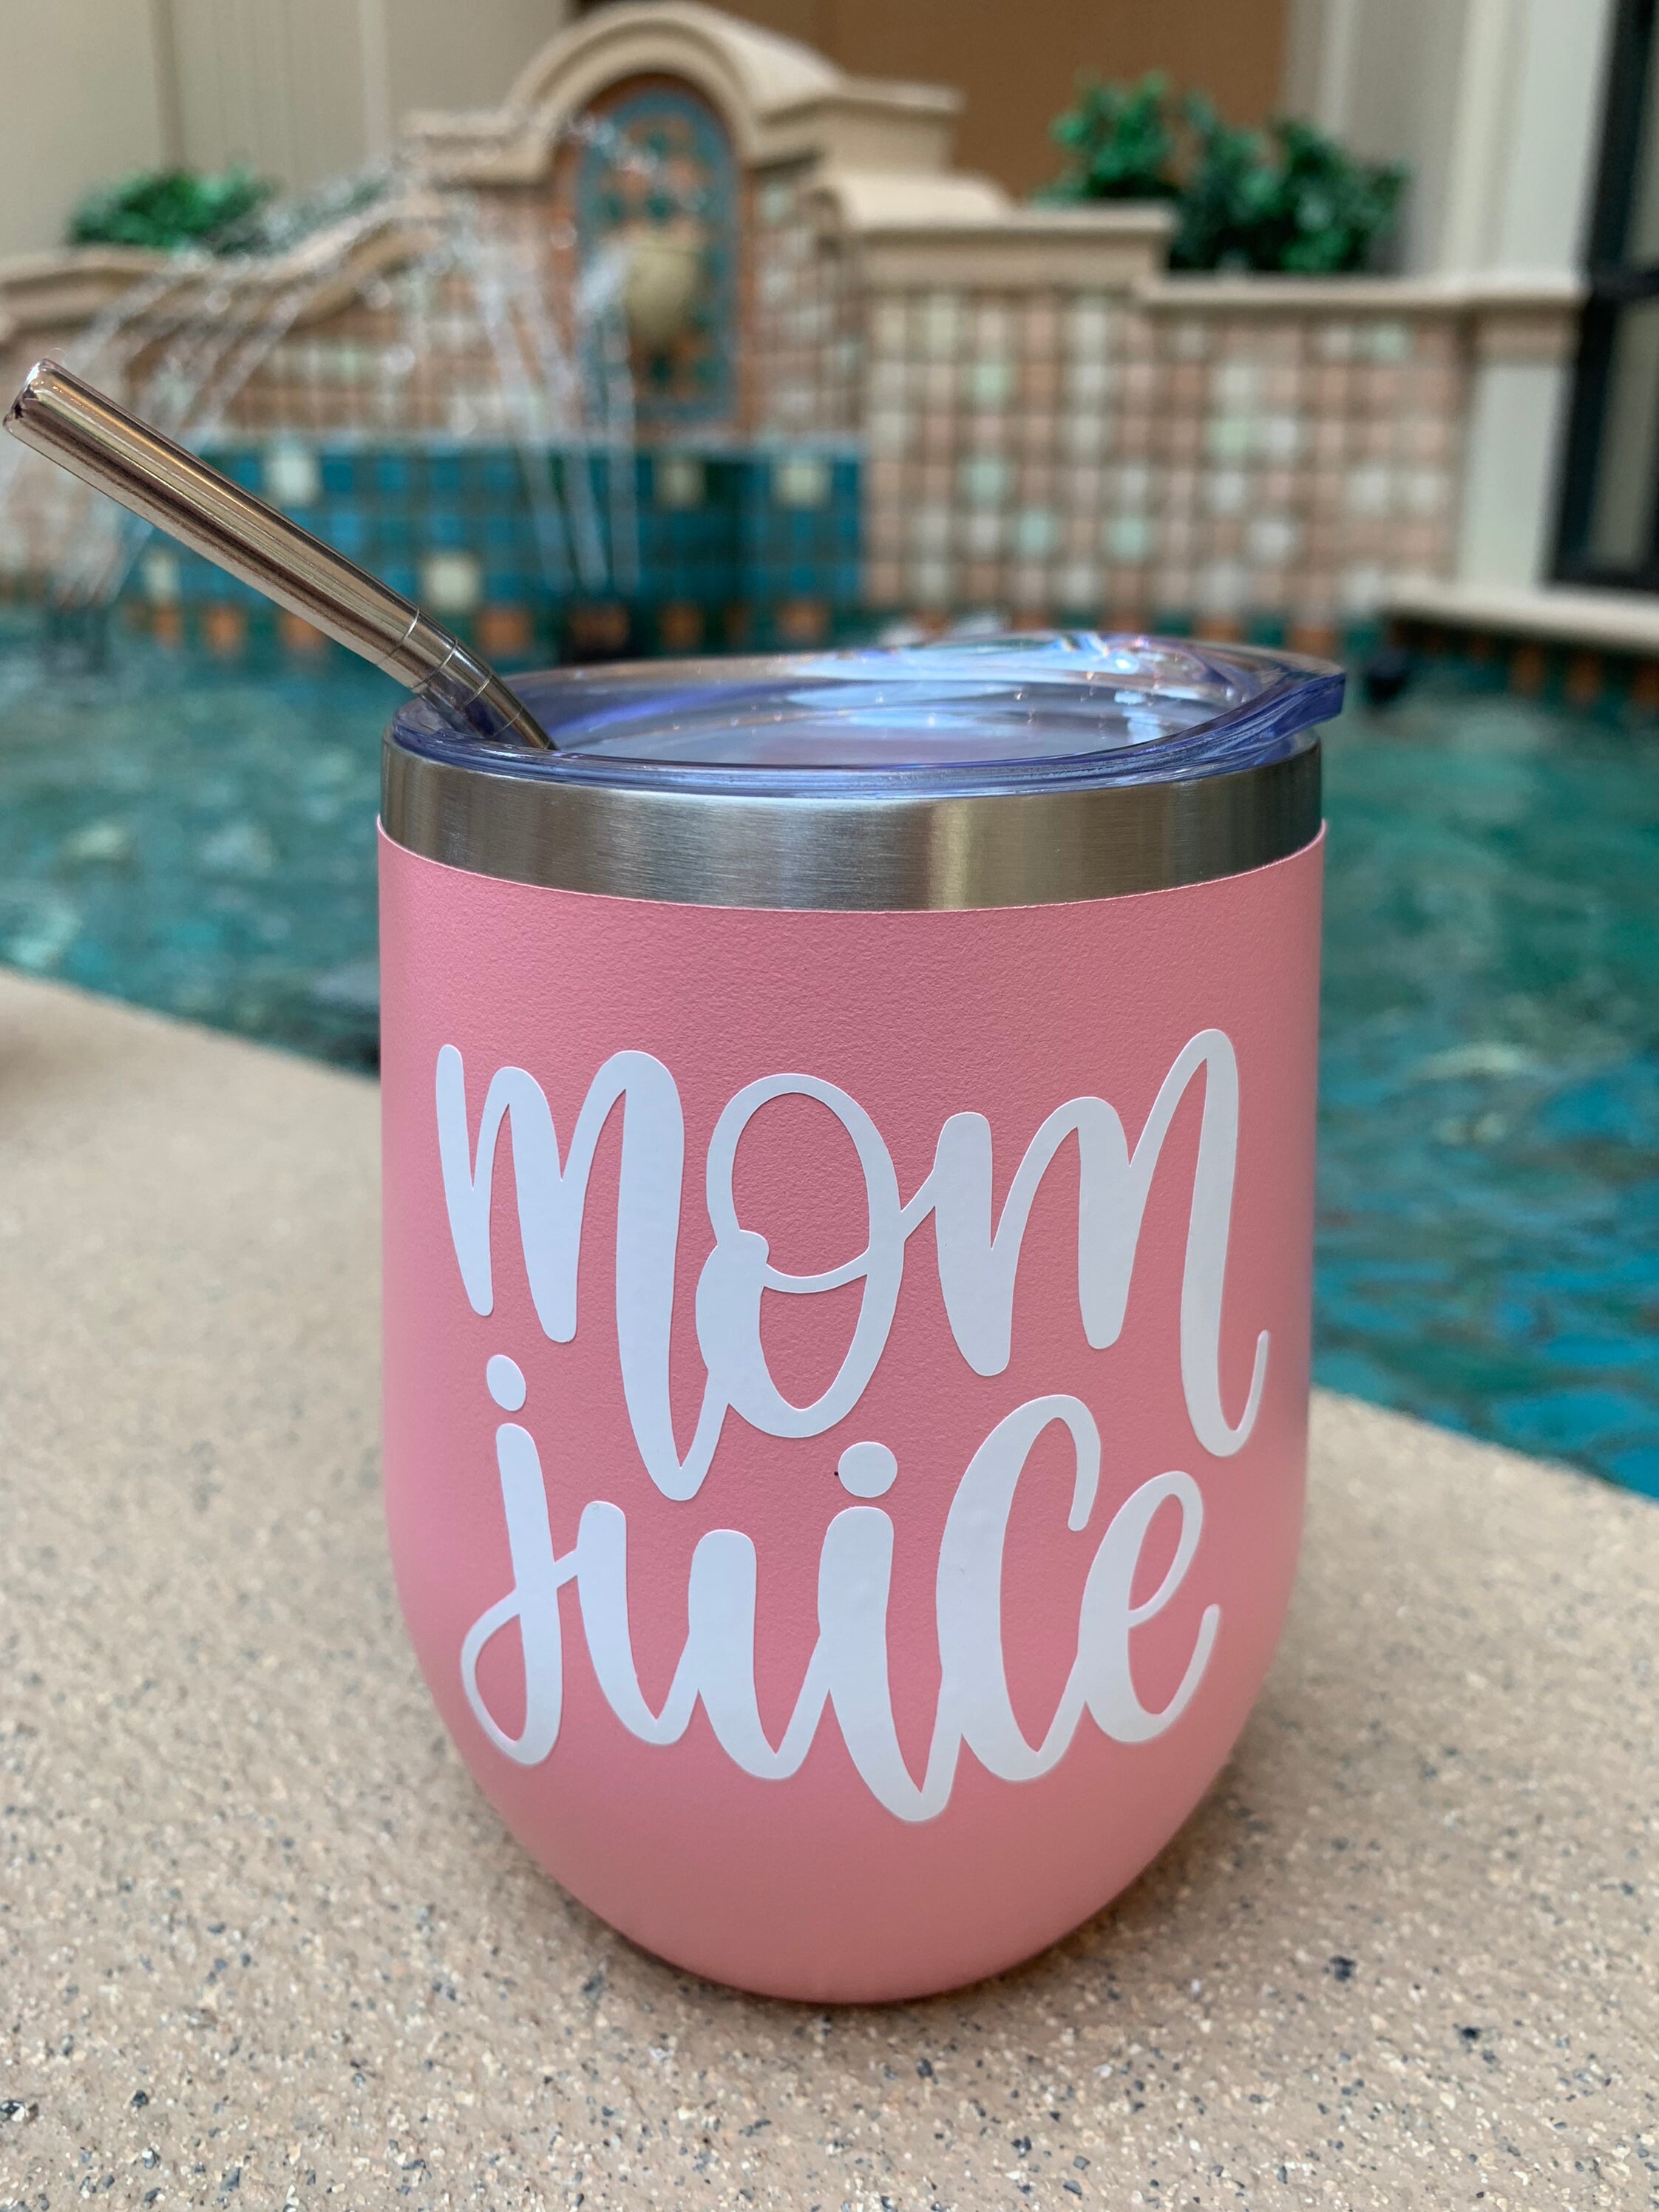 Mom Juice Tumbler - 12 oz - Mom Tumbler - Gifts for Mom, Mom Birthday  Gifts, Mom Wine Glass, Mom Gifts, Gift ideas for Mom - New Mom Gifts -  Mothers